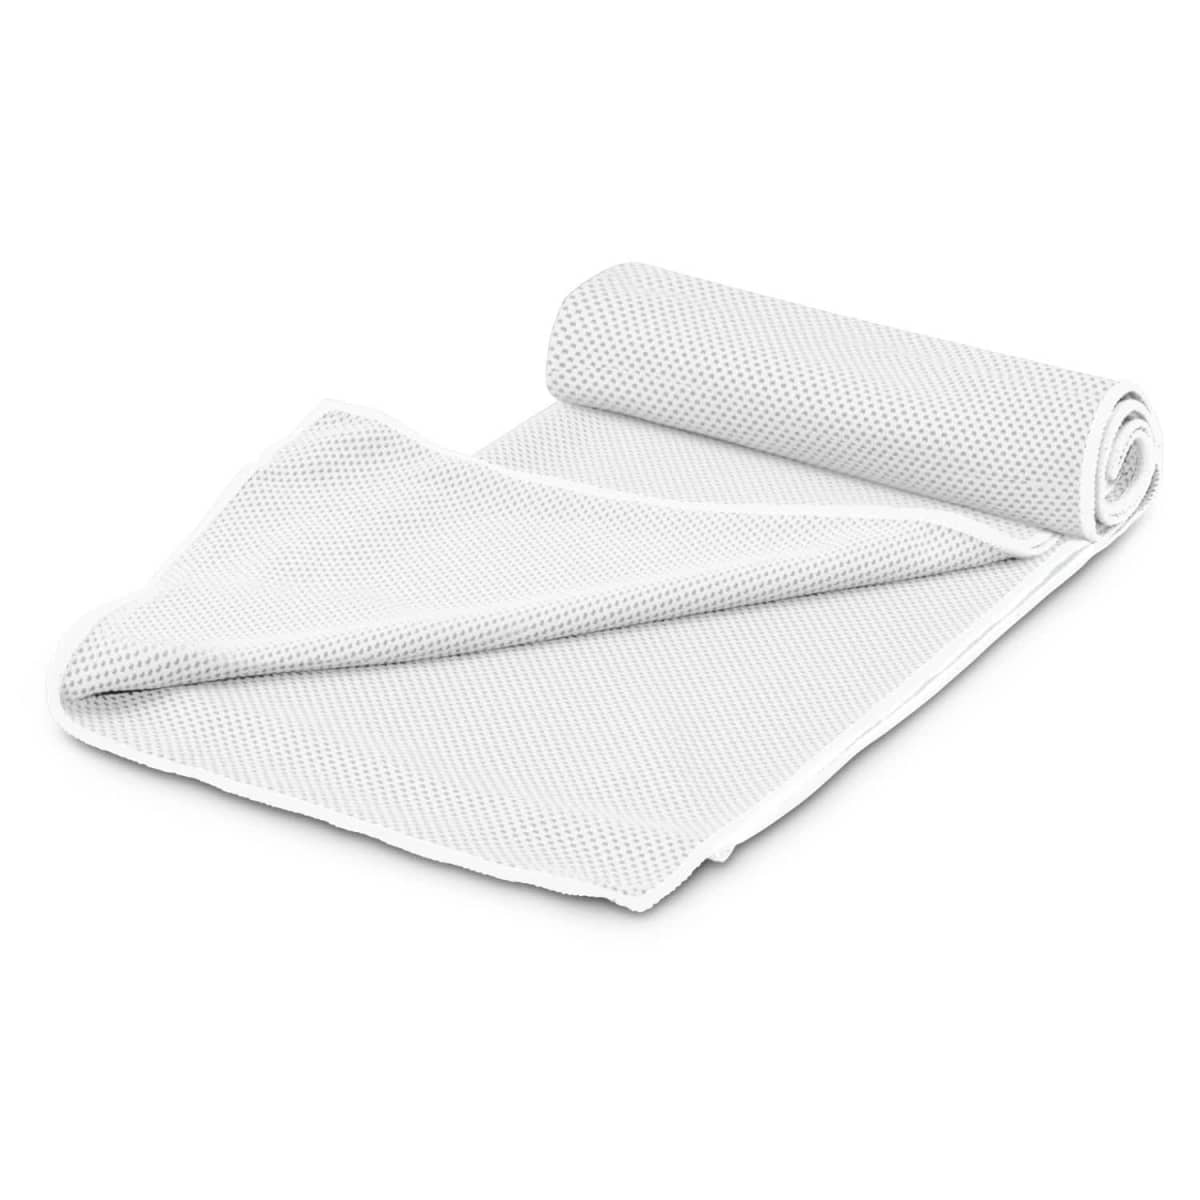 Yeti Premium Cooling Towel - Pouch